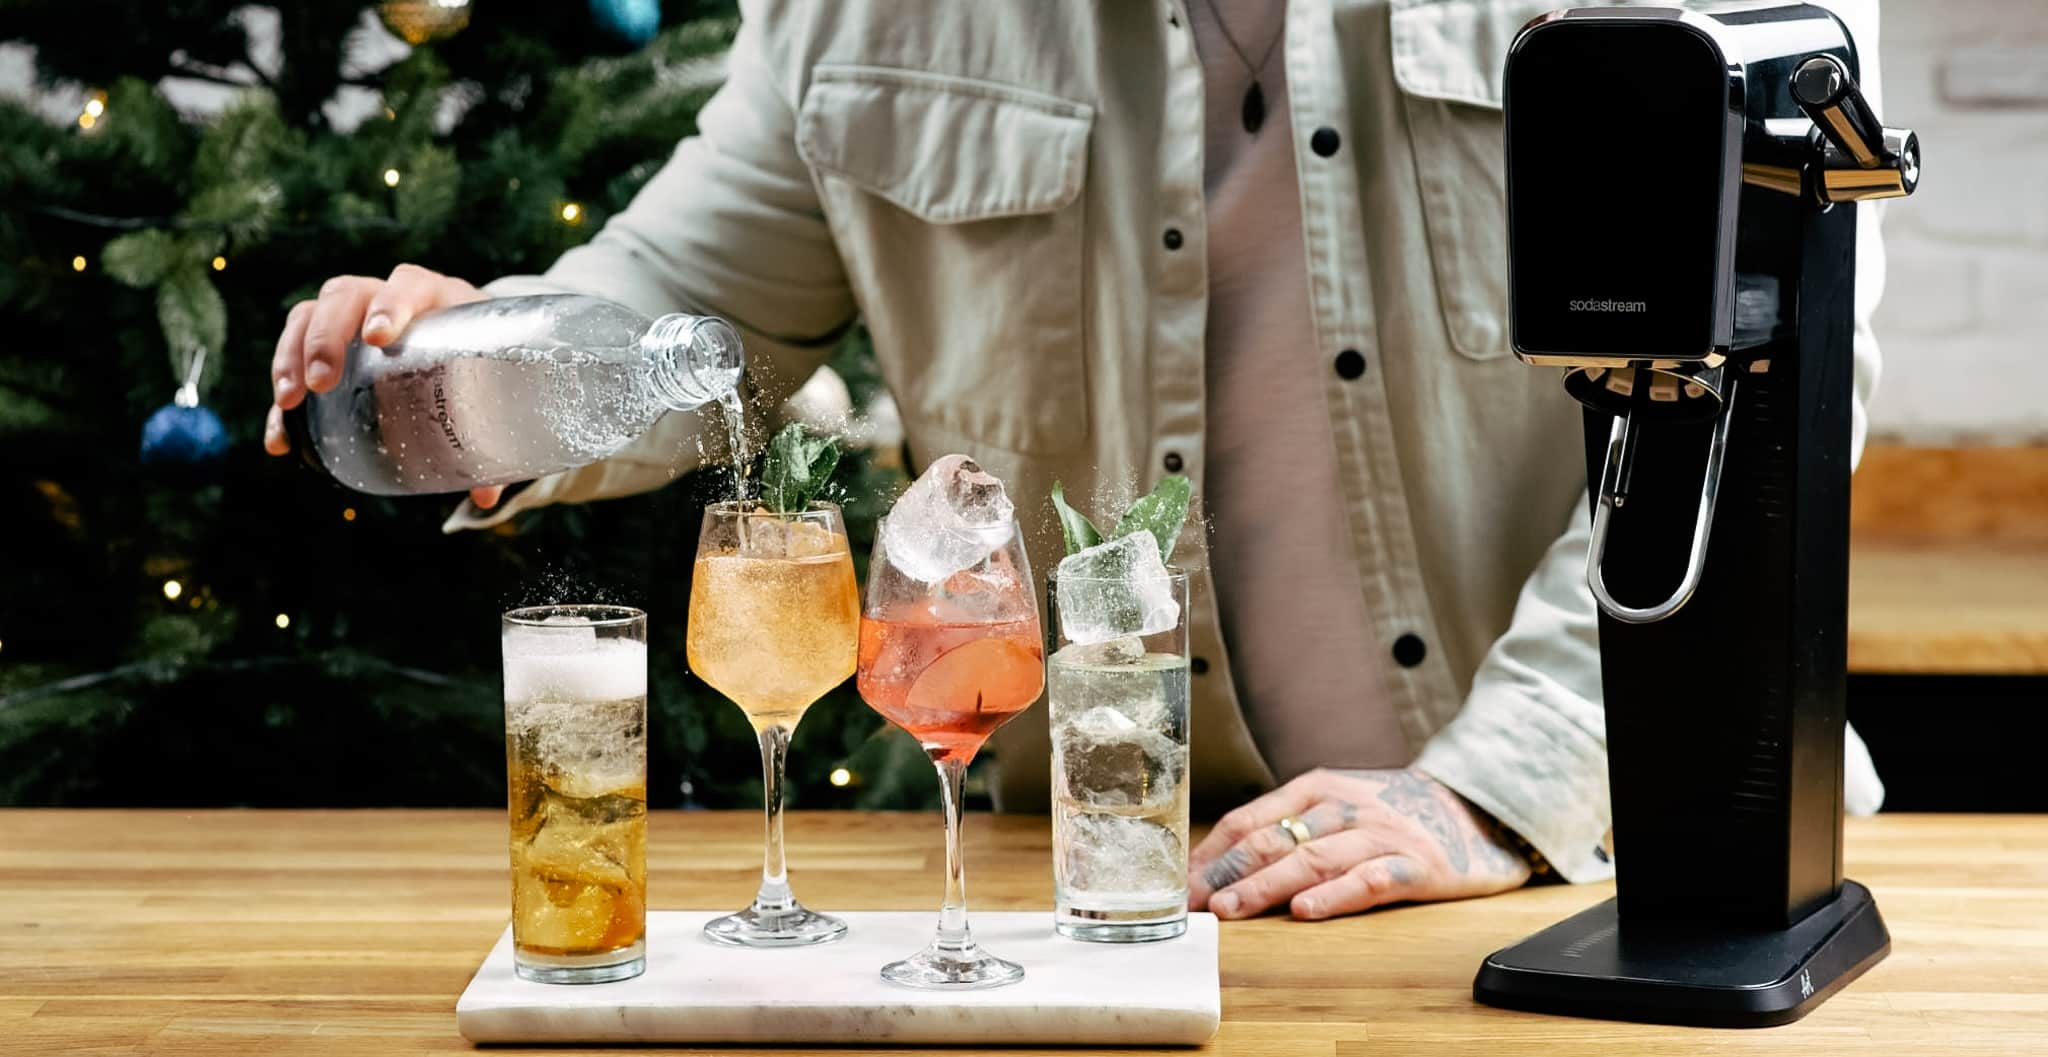 Person makes cocktails with sodastream machine